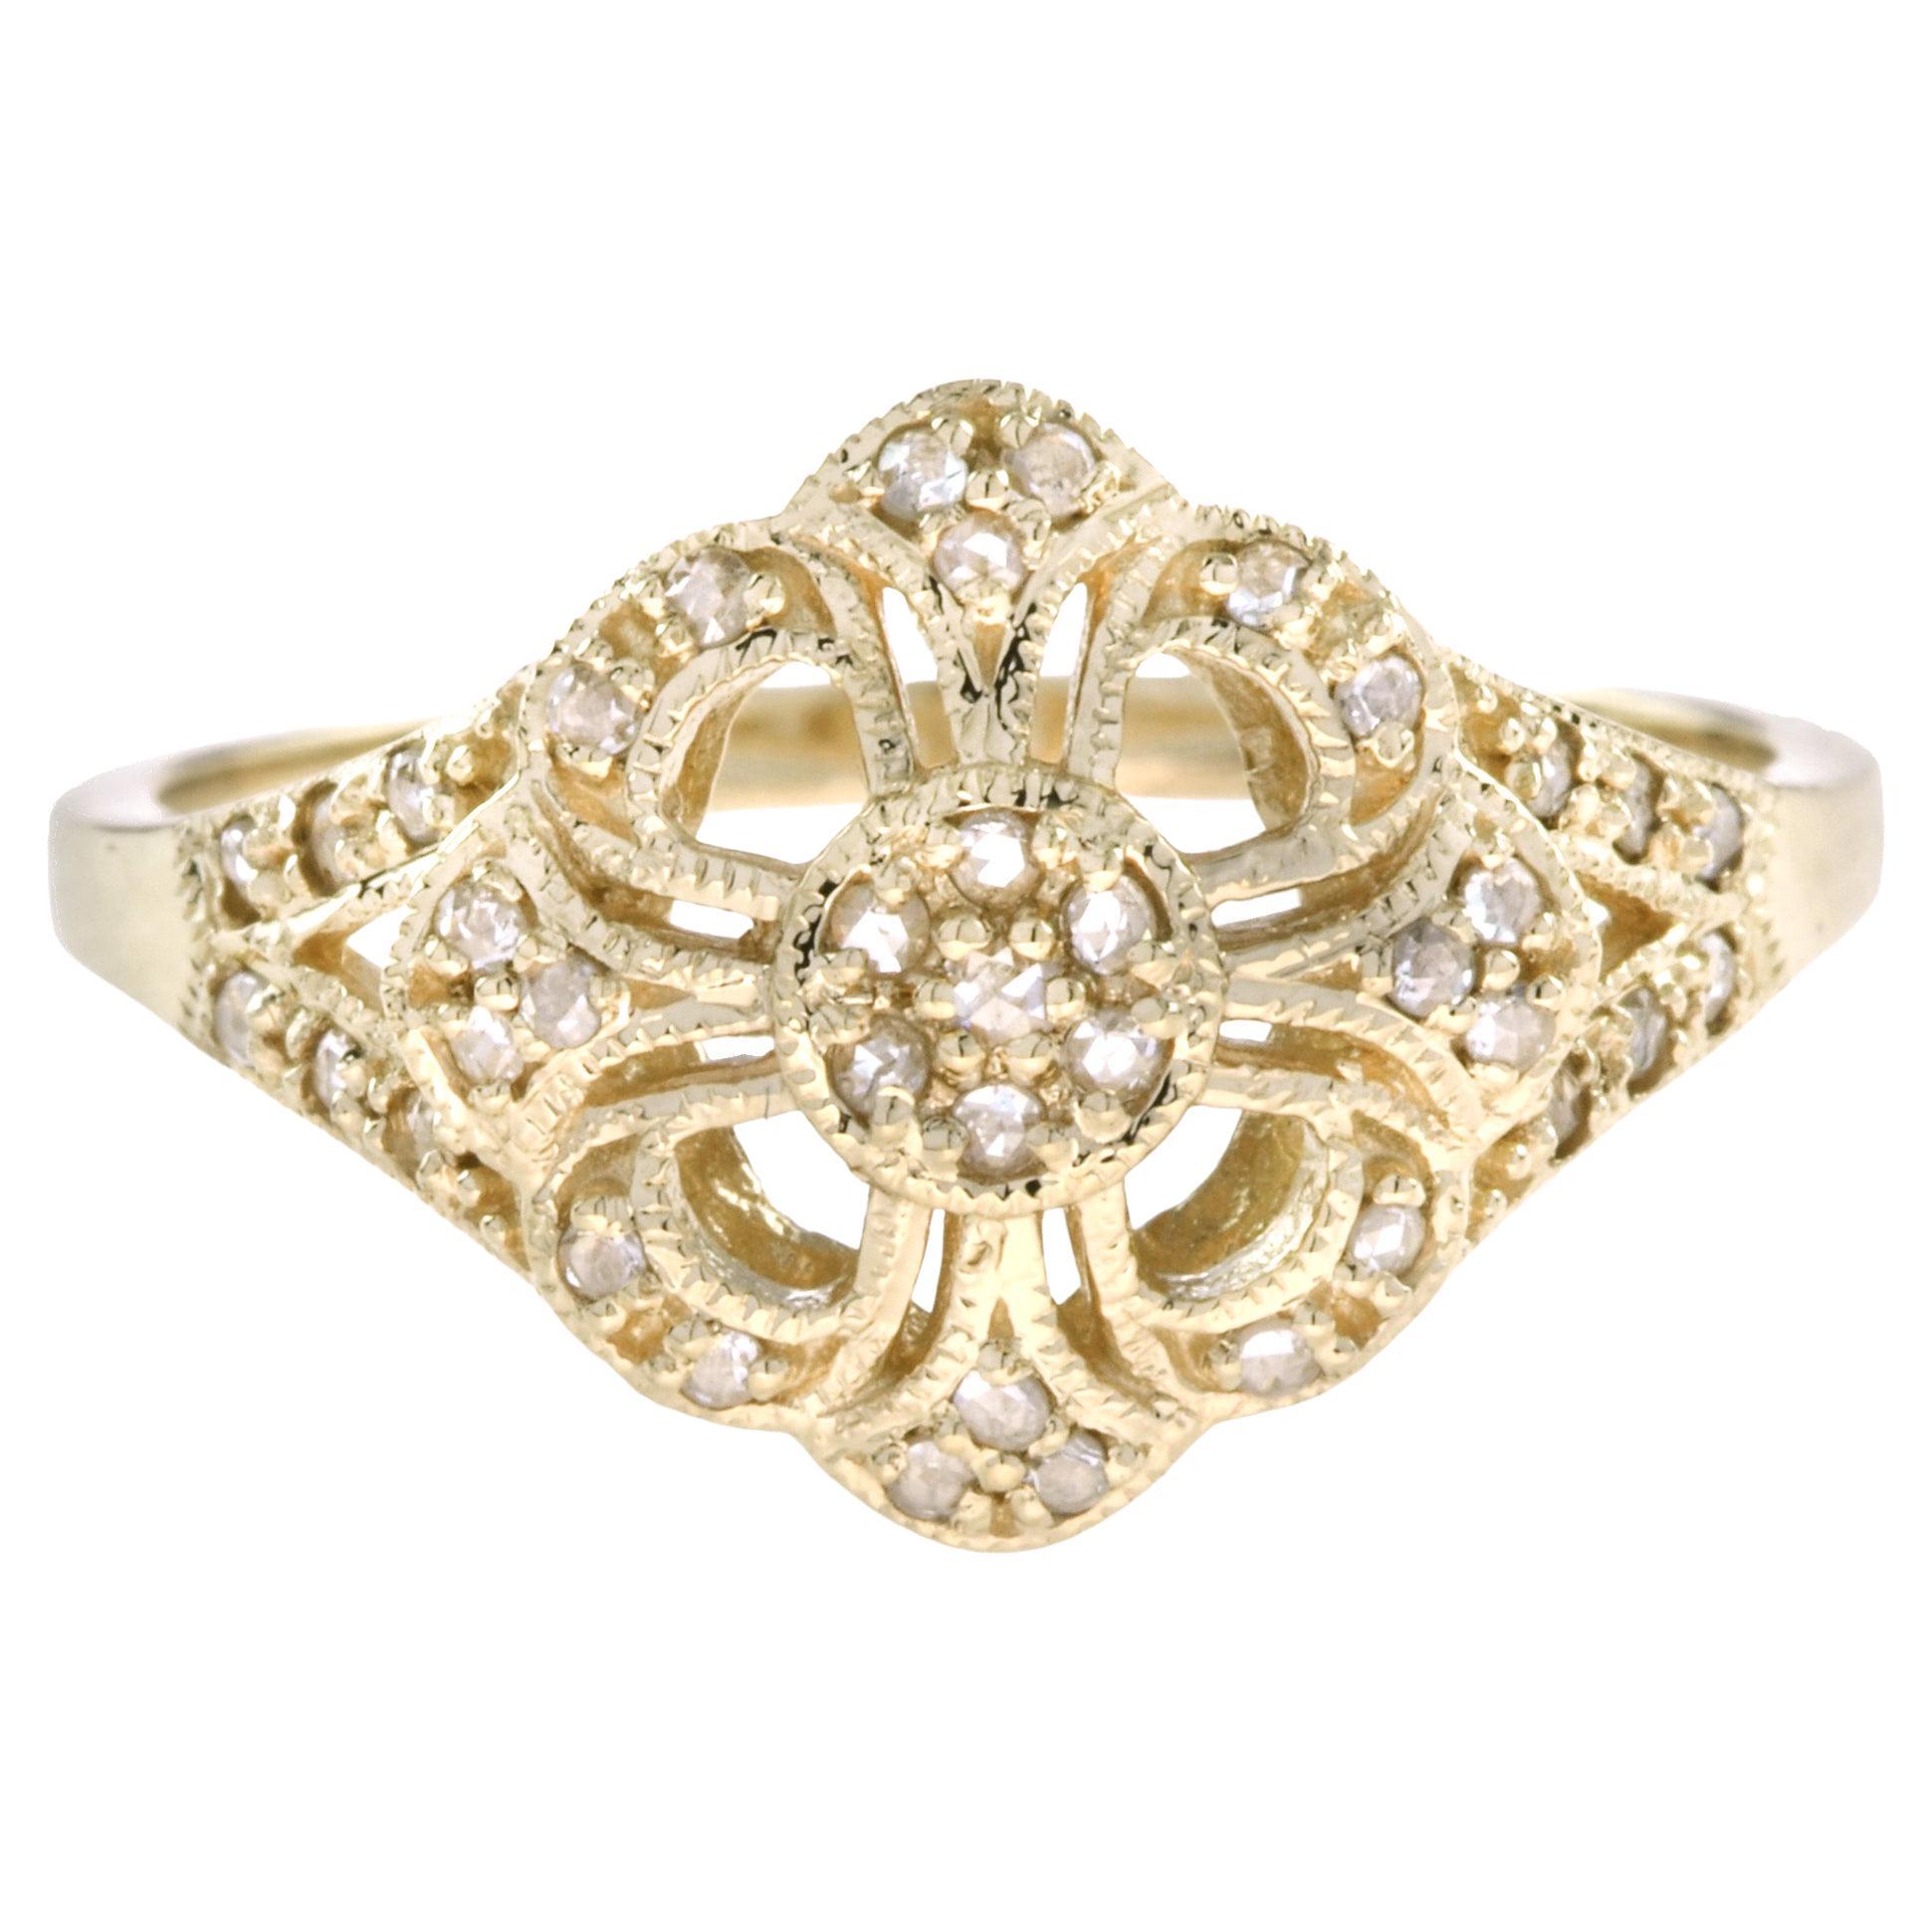 Vintage Style Diamond Flower Ring in 18K Yellow Gold